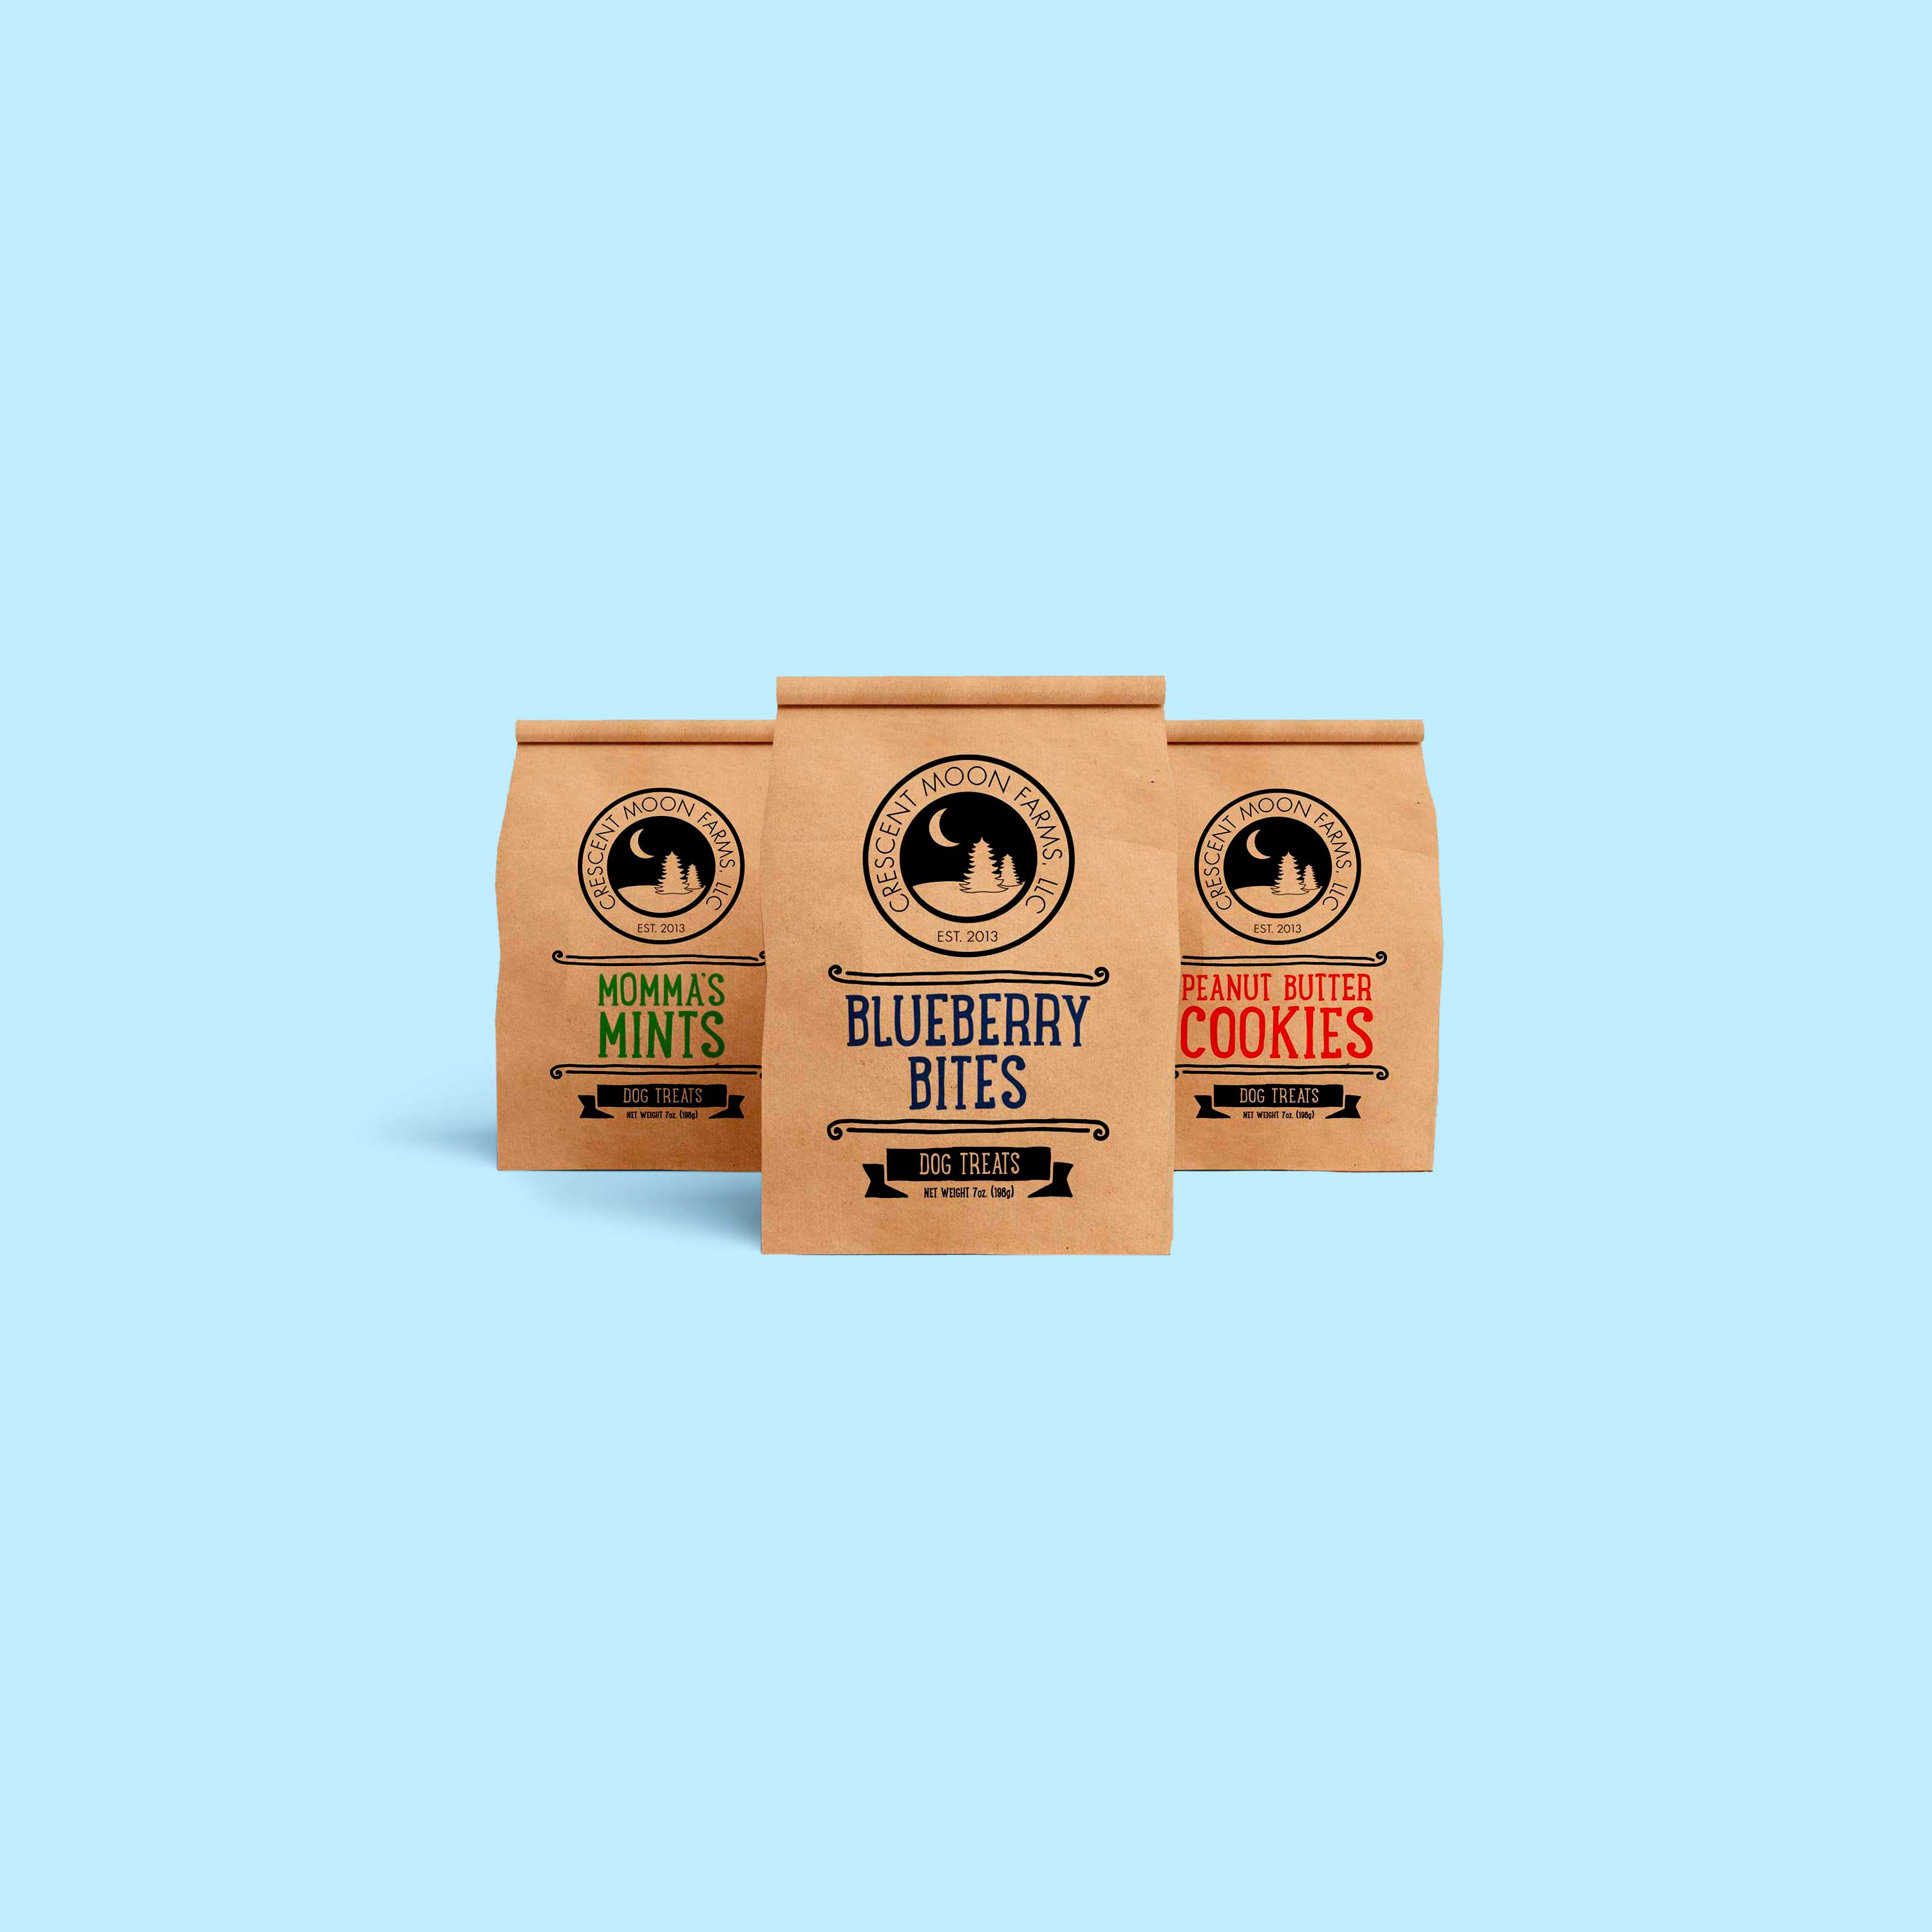 Package design for Crescent Moon Farms dog treats